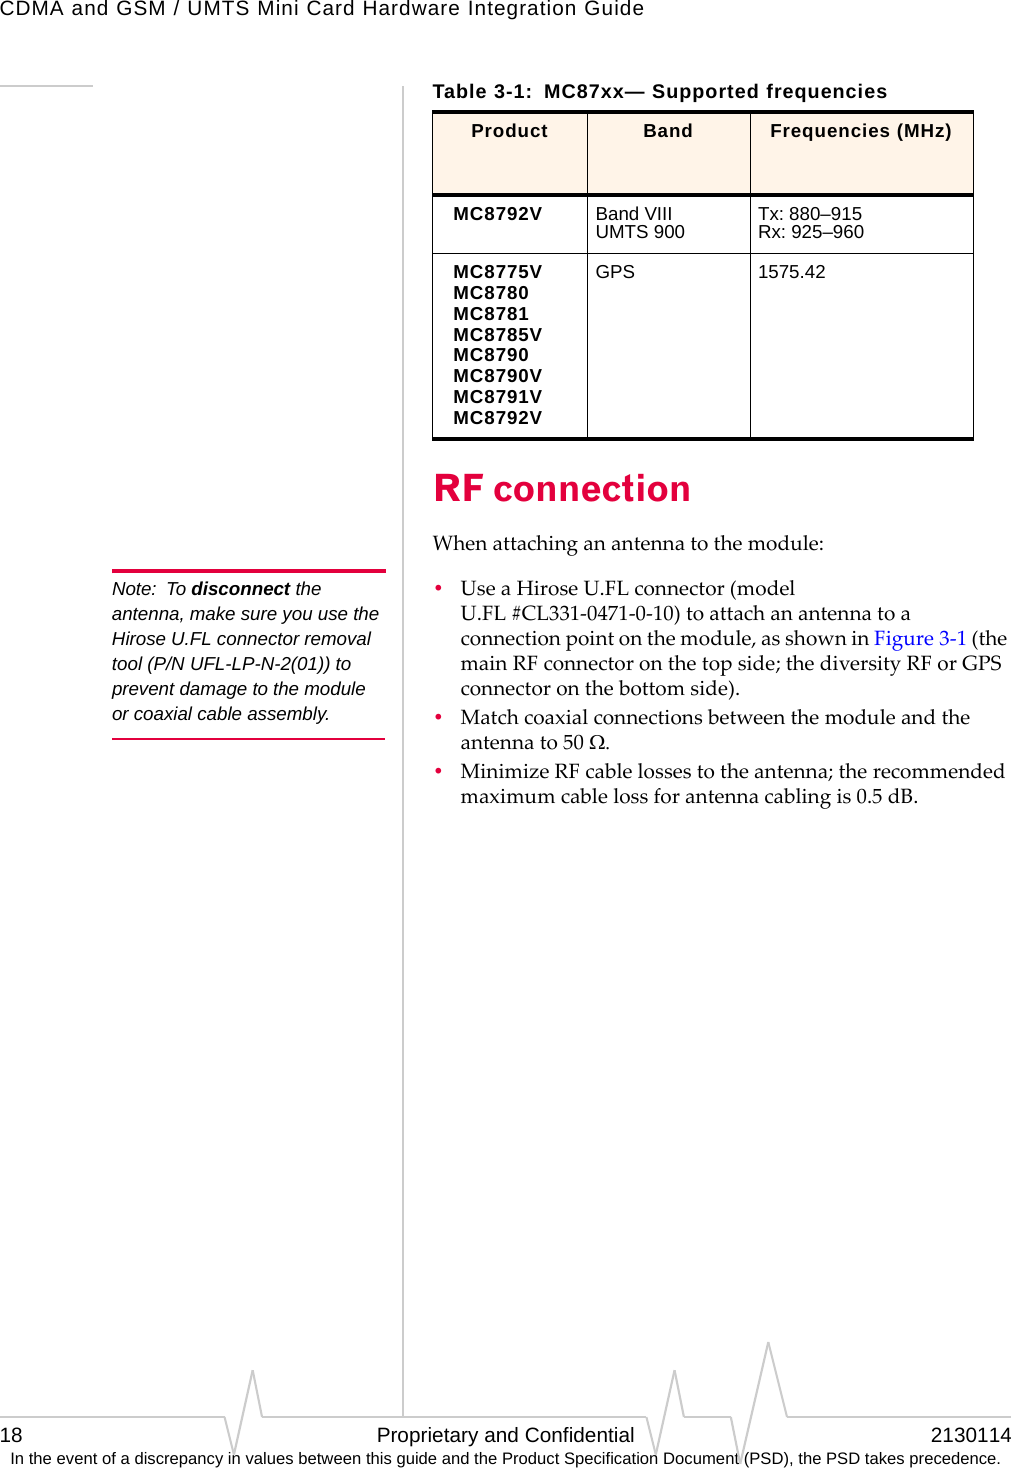 CDMA and GSM / UMTS Mini Card Hardware Integration Guide18 Proprietary and Confidential 2130114In the event of a discrepancy in values between this guide and the Product Specification Document (PSD), the PSD takes precedence.RF connectionWhenattachinganantennatothemodule:Note: To disconnect the antenna, make sure you use the Hirose U.FL connector removal tool (P/N UFL-LP-N-2(01)) to prevent damage to the module or coaxial cable assembly.•UseaHiroseU.FLconnector(modelU.FL#CL331‐0471‐0‐10)toattachanantennatoaconnectionpointonthemodule,asshowninFigure3‐1(themainRFconnectoronthetopside;thediversityRForGPSconnectoronthebottomside).•Matchcoaxialconnectionsbetweenthemoduleandtheantennato50Ω.•MinimizeRFcablelossestotheantenna;therecommendedmaximumcablelossforantennacablingis0.5dB.MC8792V Band VIII UMTS 900 Tx: 880–915 Rx: 925–960MC8775VMC8780MC8781MC8785VMC8790MC8790VMC8791VMC8792VGPS 1575.42Table 3-1:  MC87xx— Supported frequencies Product Band Frequencies (MHz)